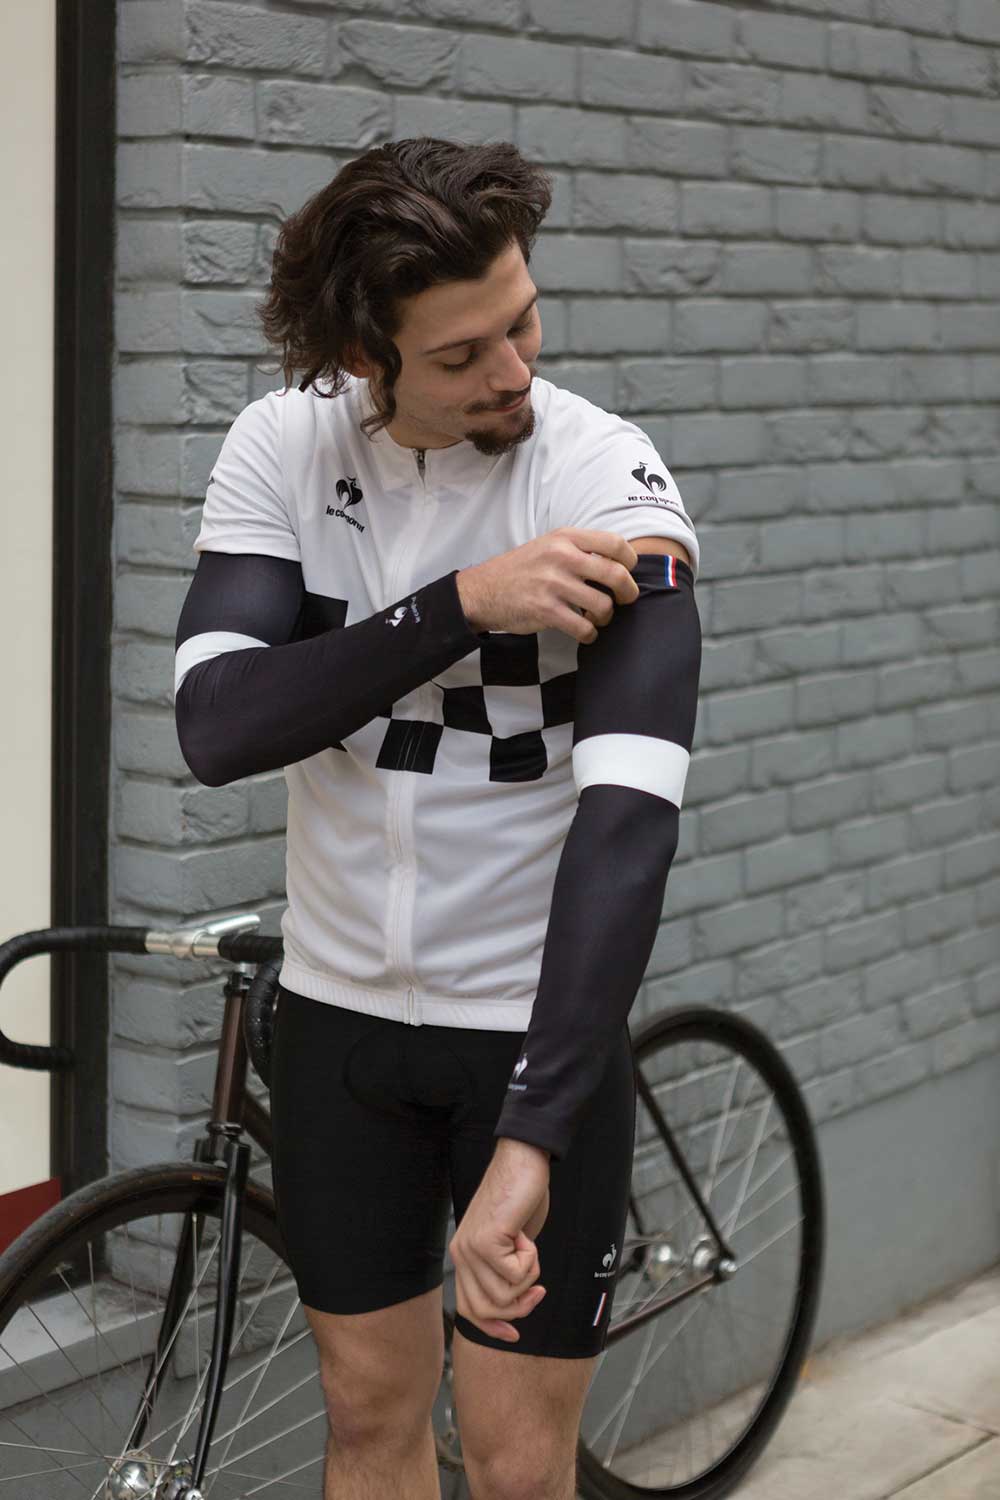 le-coq-sportif-cycling-performance-day-x-night-image-7